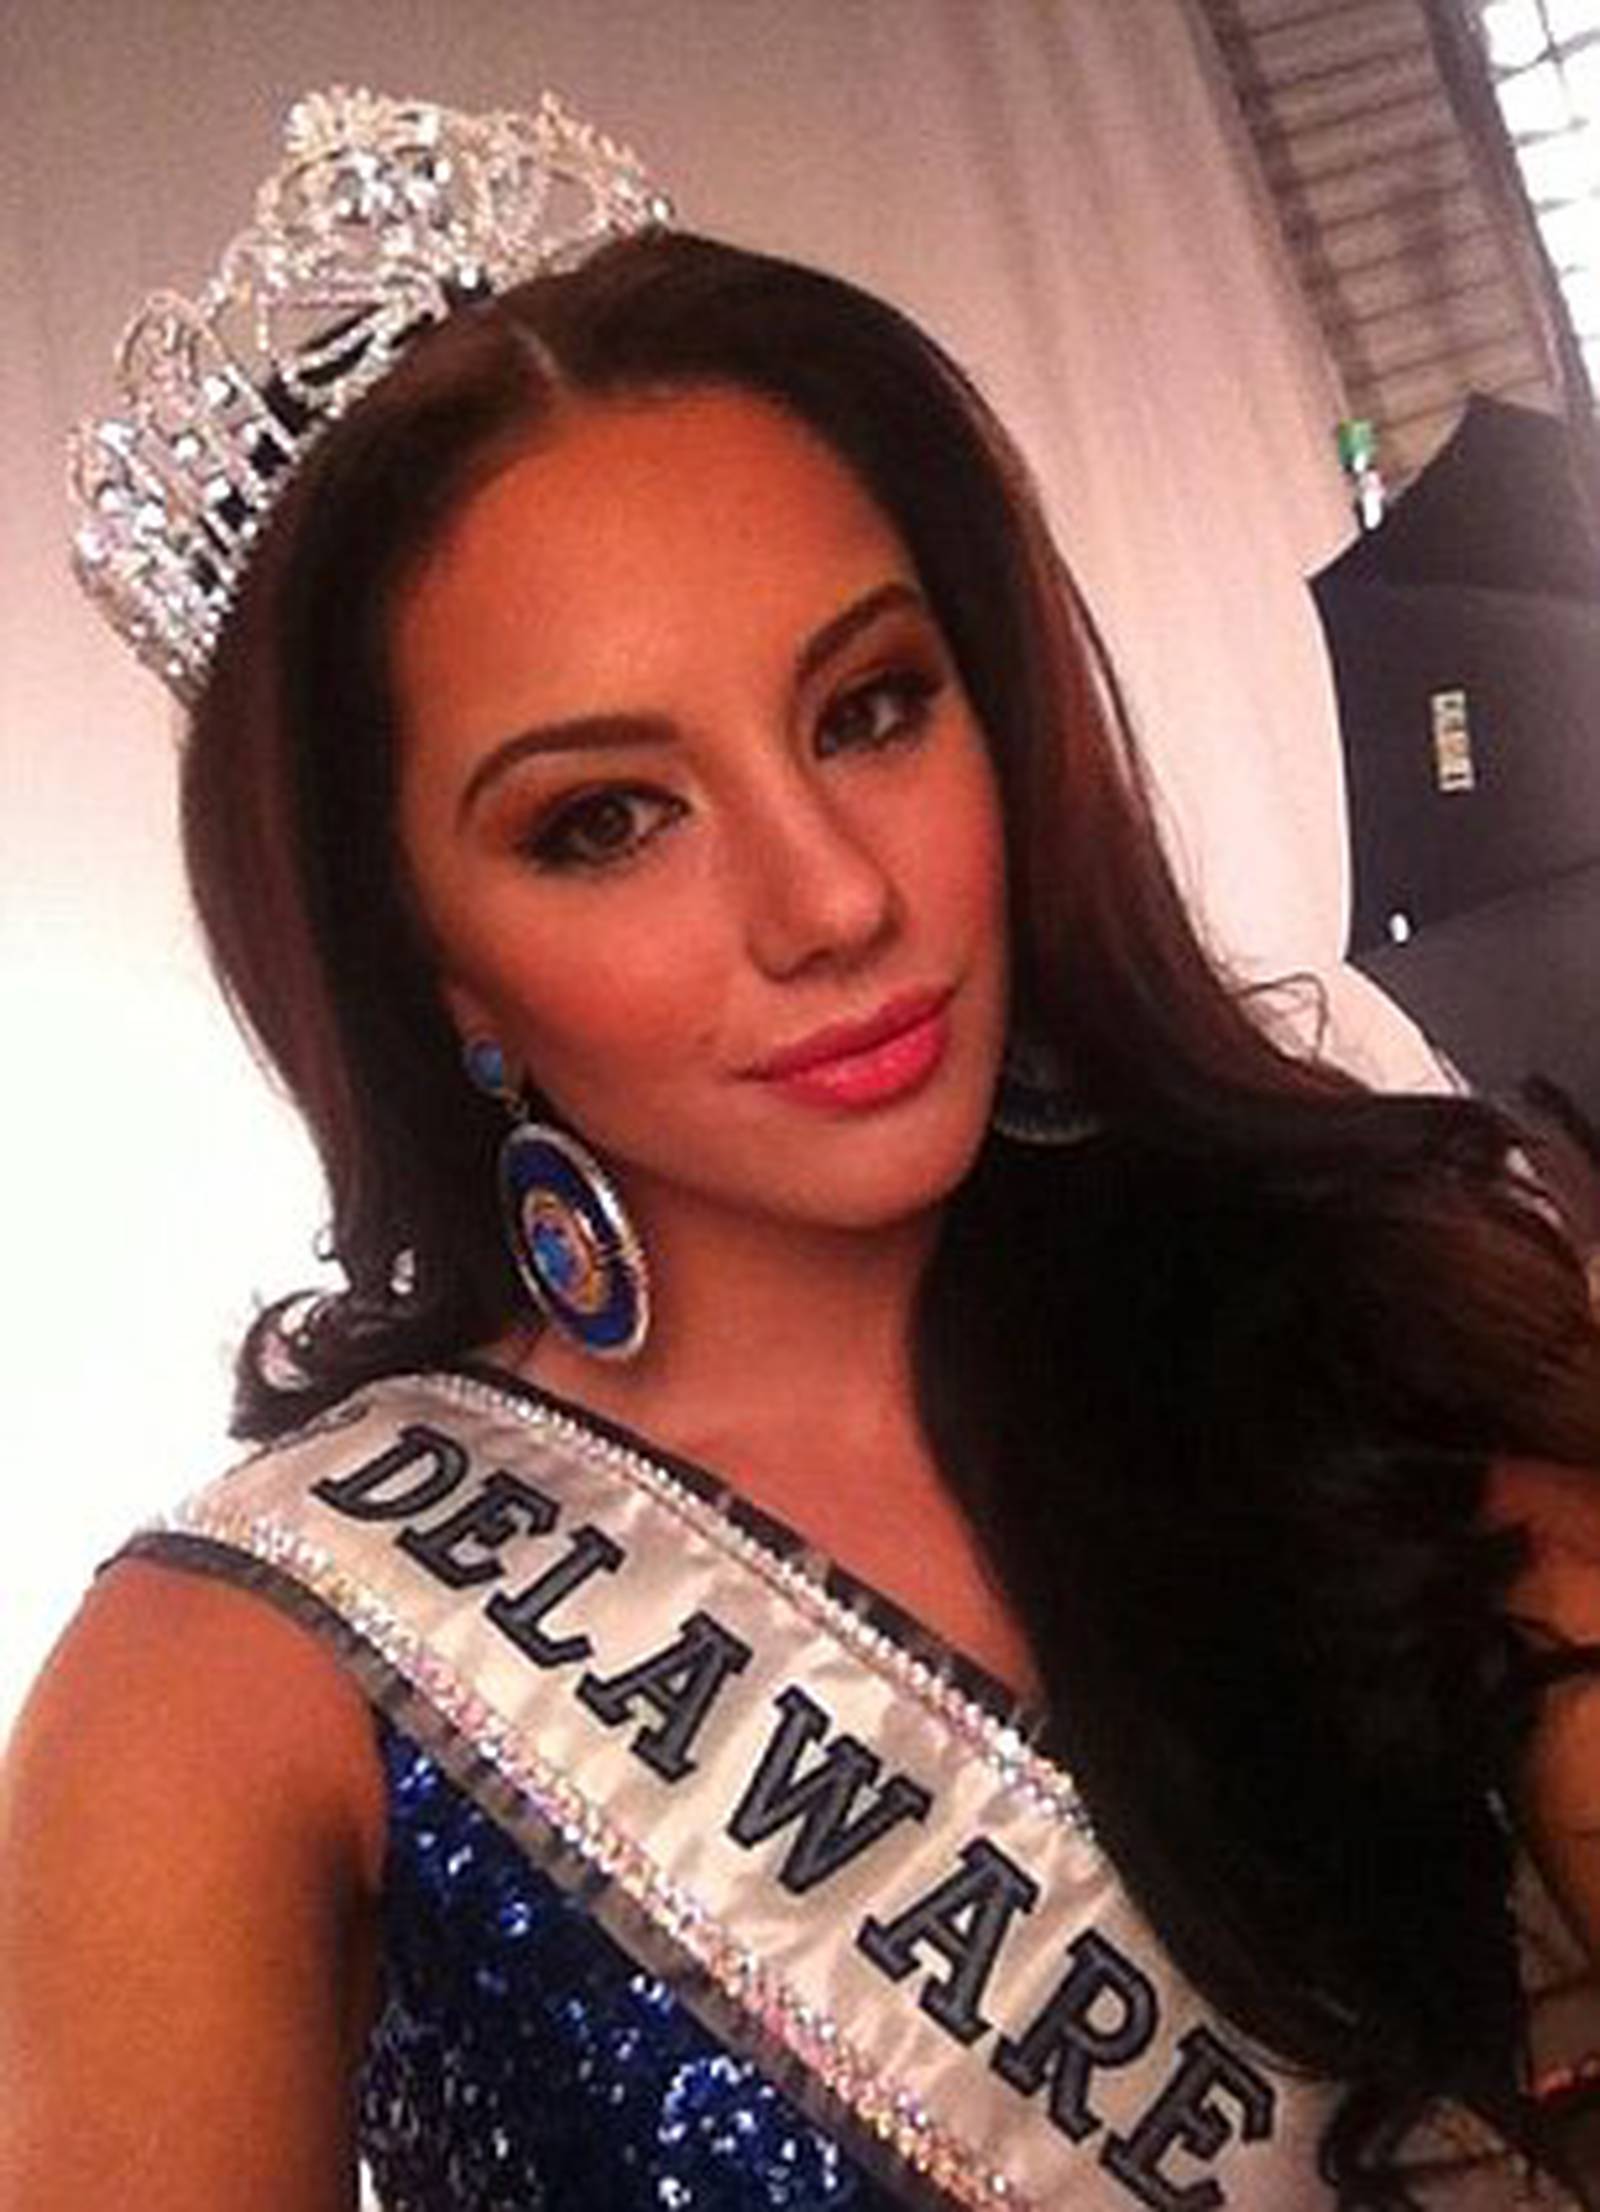 Teen Beauty Queen Steps Down After Porn Tape Allegations 102 3 Krmg